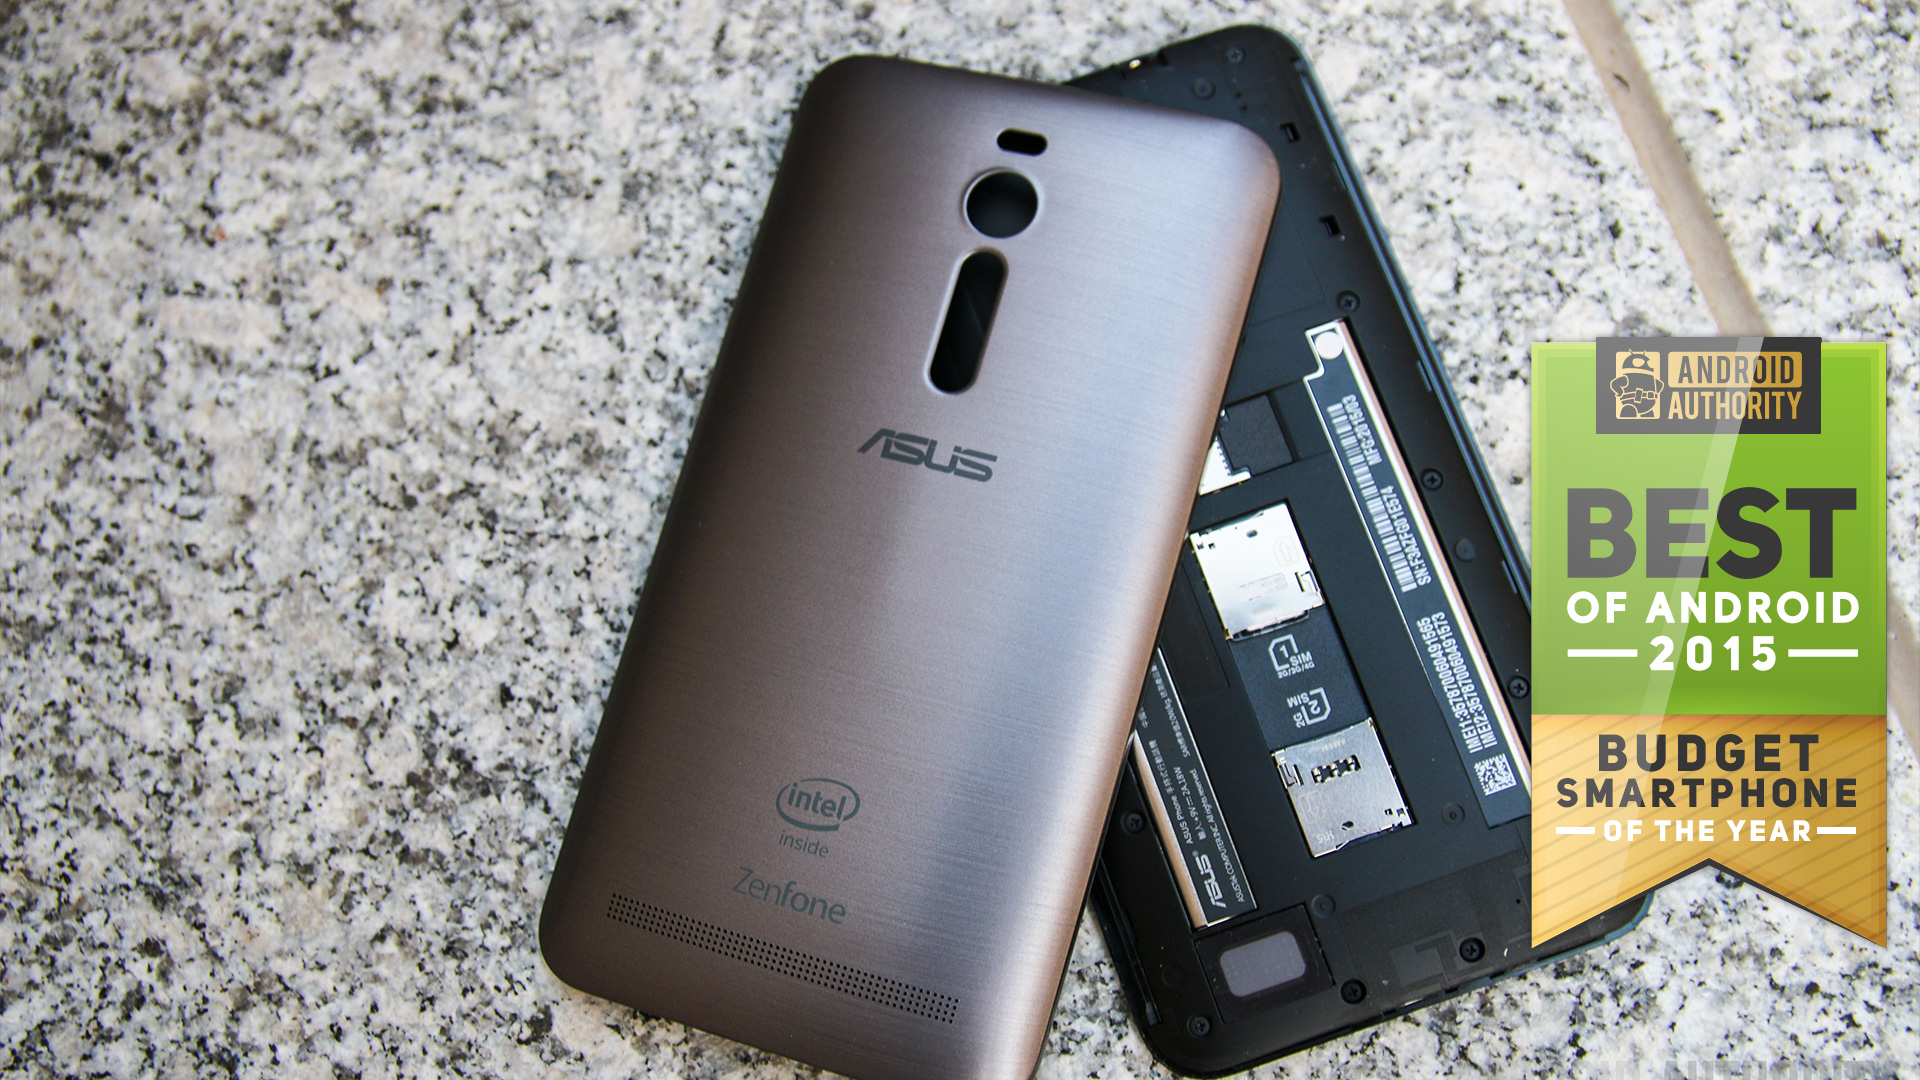 budget smartphone of the year 2015 - asus zenfone 2